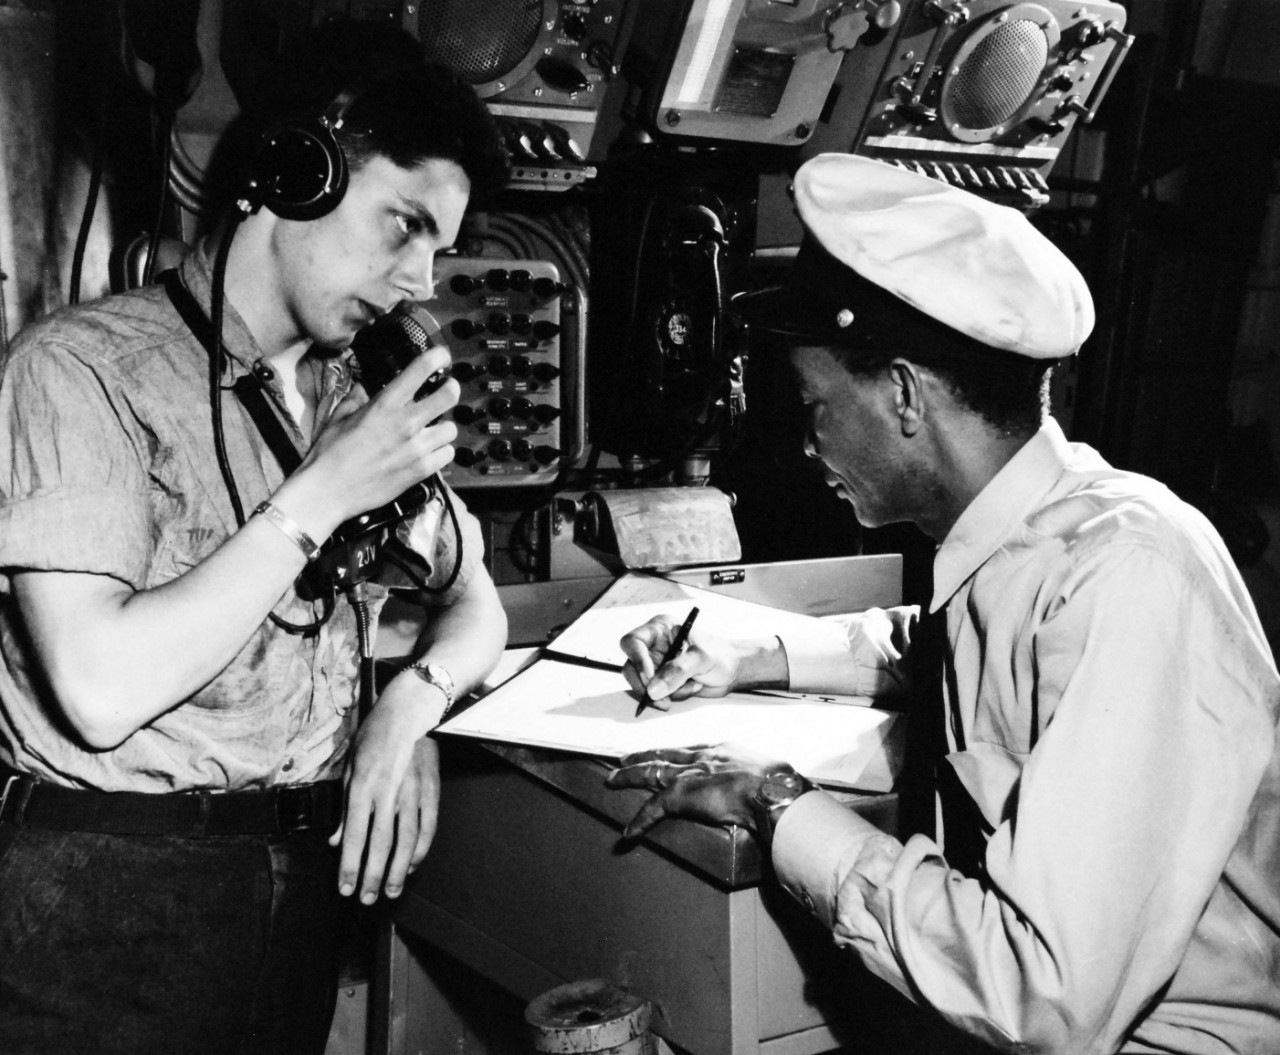 80-G-413546:   USS Coral Sea (CVA 43), May 5, 1949.    CMM Leslie Ponder makes entries in main engine room while FA J. Toles wears telephone headset and relays reports to the Chief from various engineering spaces of the ship.  Official U.S. Navy Photograph, now in the collections of the National Archives.  